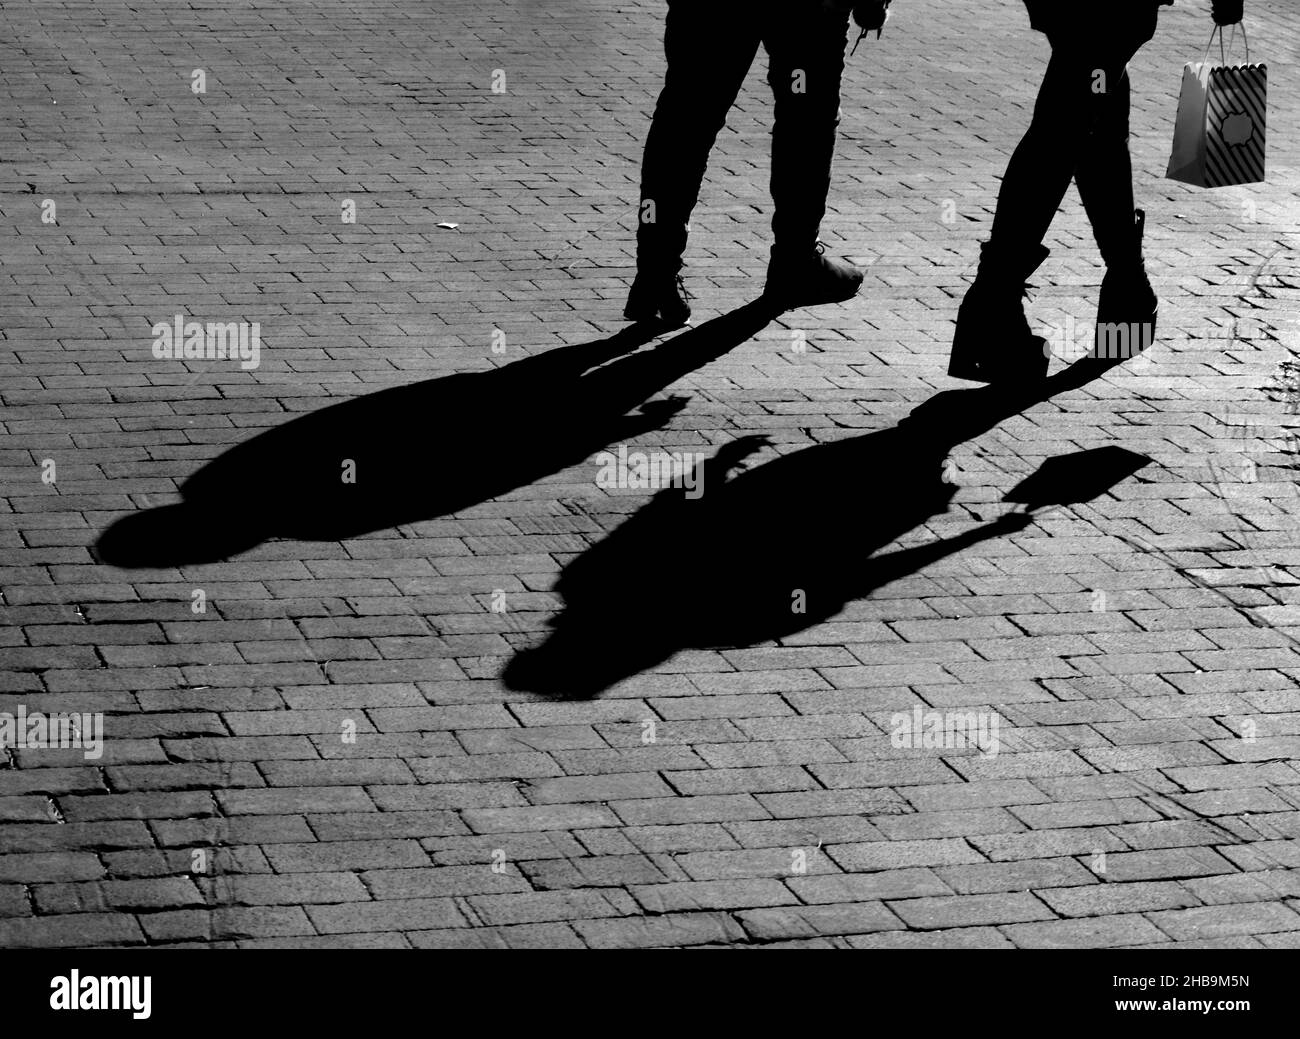 Tourists cast long afternoon shadows as they walk along a brick road in downtown Santa Fe, New Mexico. Stock Photo